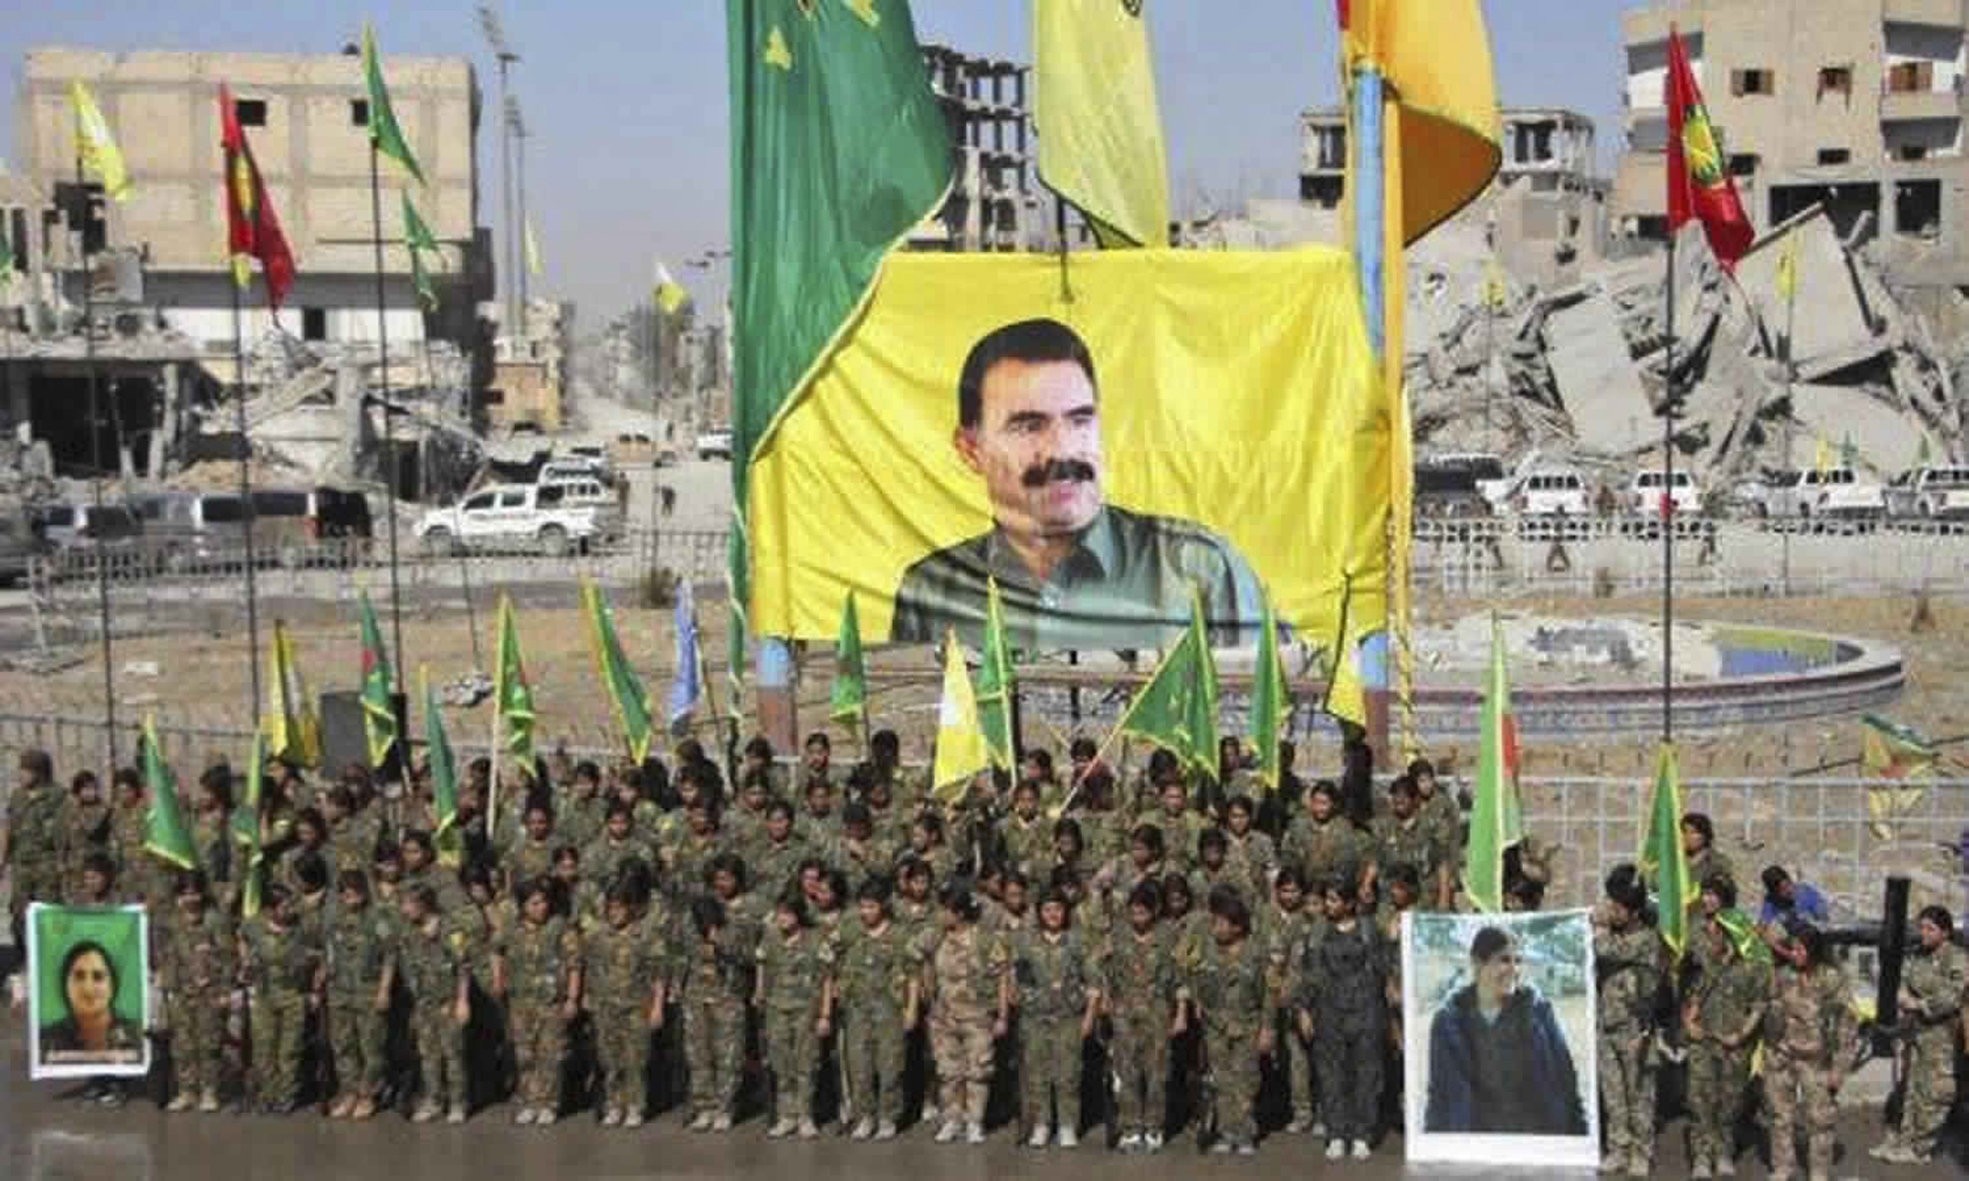 YPG members stand under a portrait of their PKK Abdullah Ocalan, as they celebrate victory against Daesh in Raqqa, Syria.(Ronahi TV, via AP)